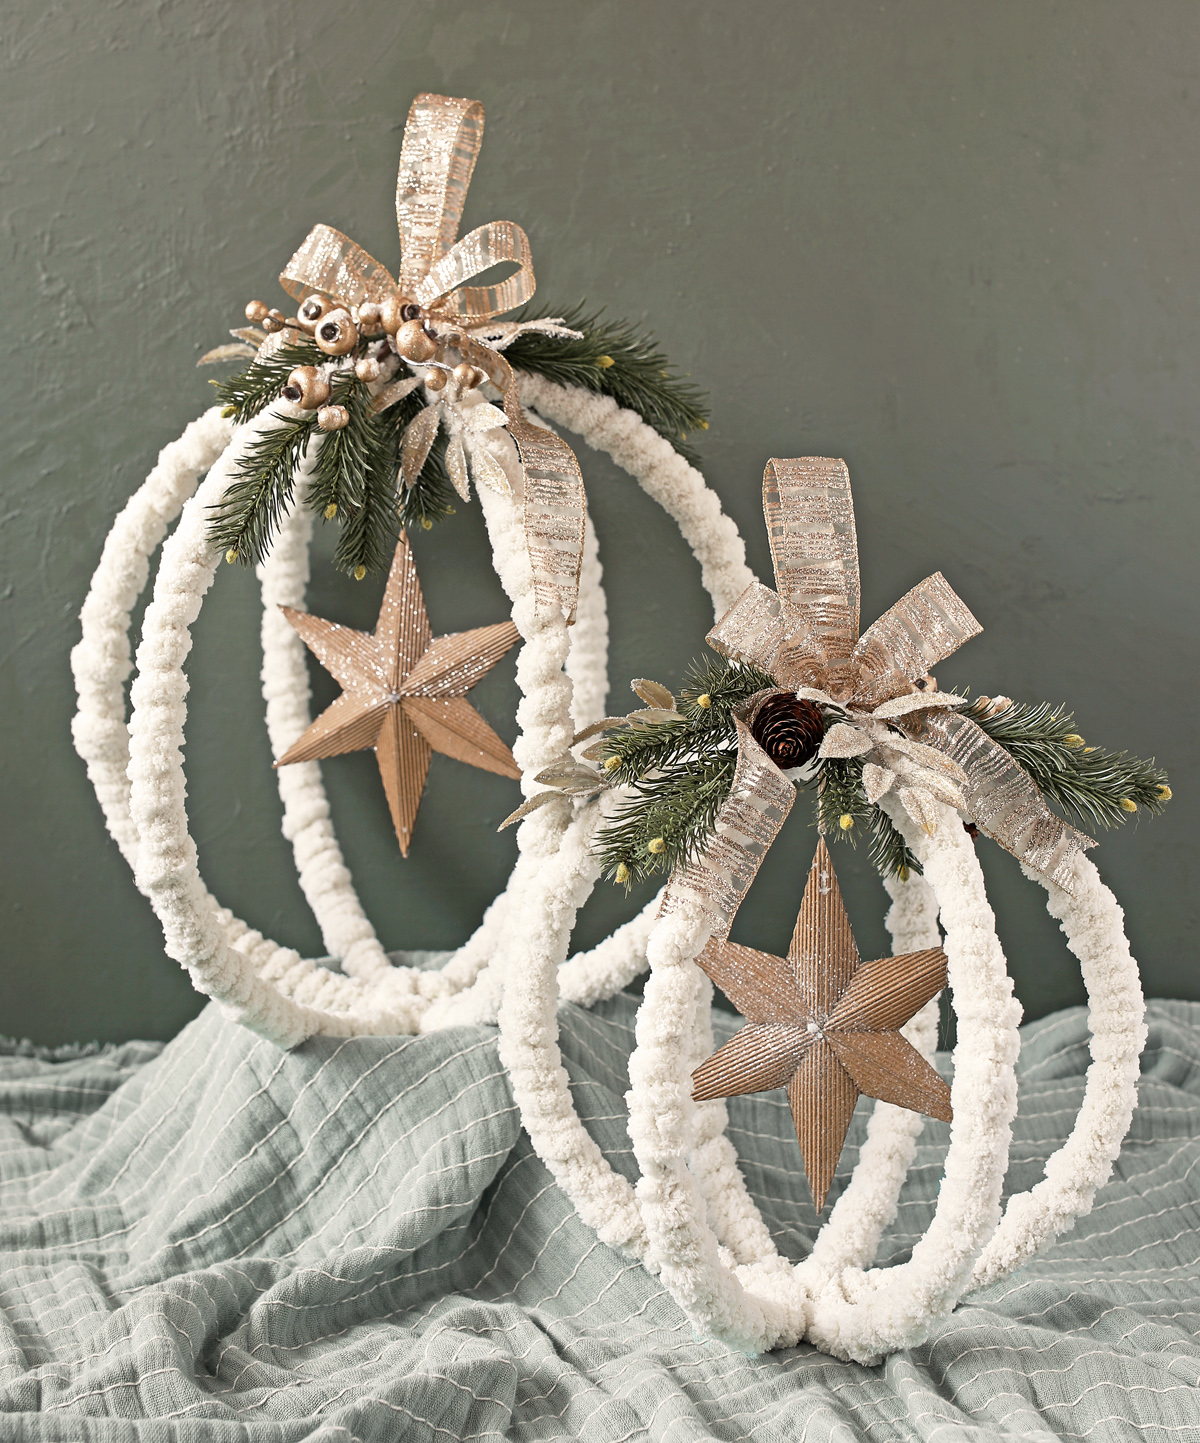 Stick Ornaments DIY all you need is wire, yarn, scissors, and glue